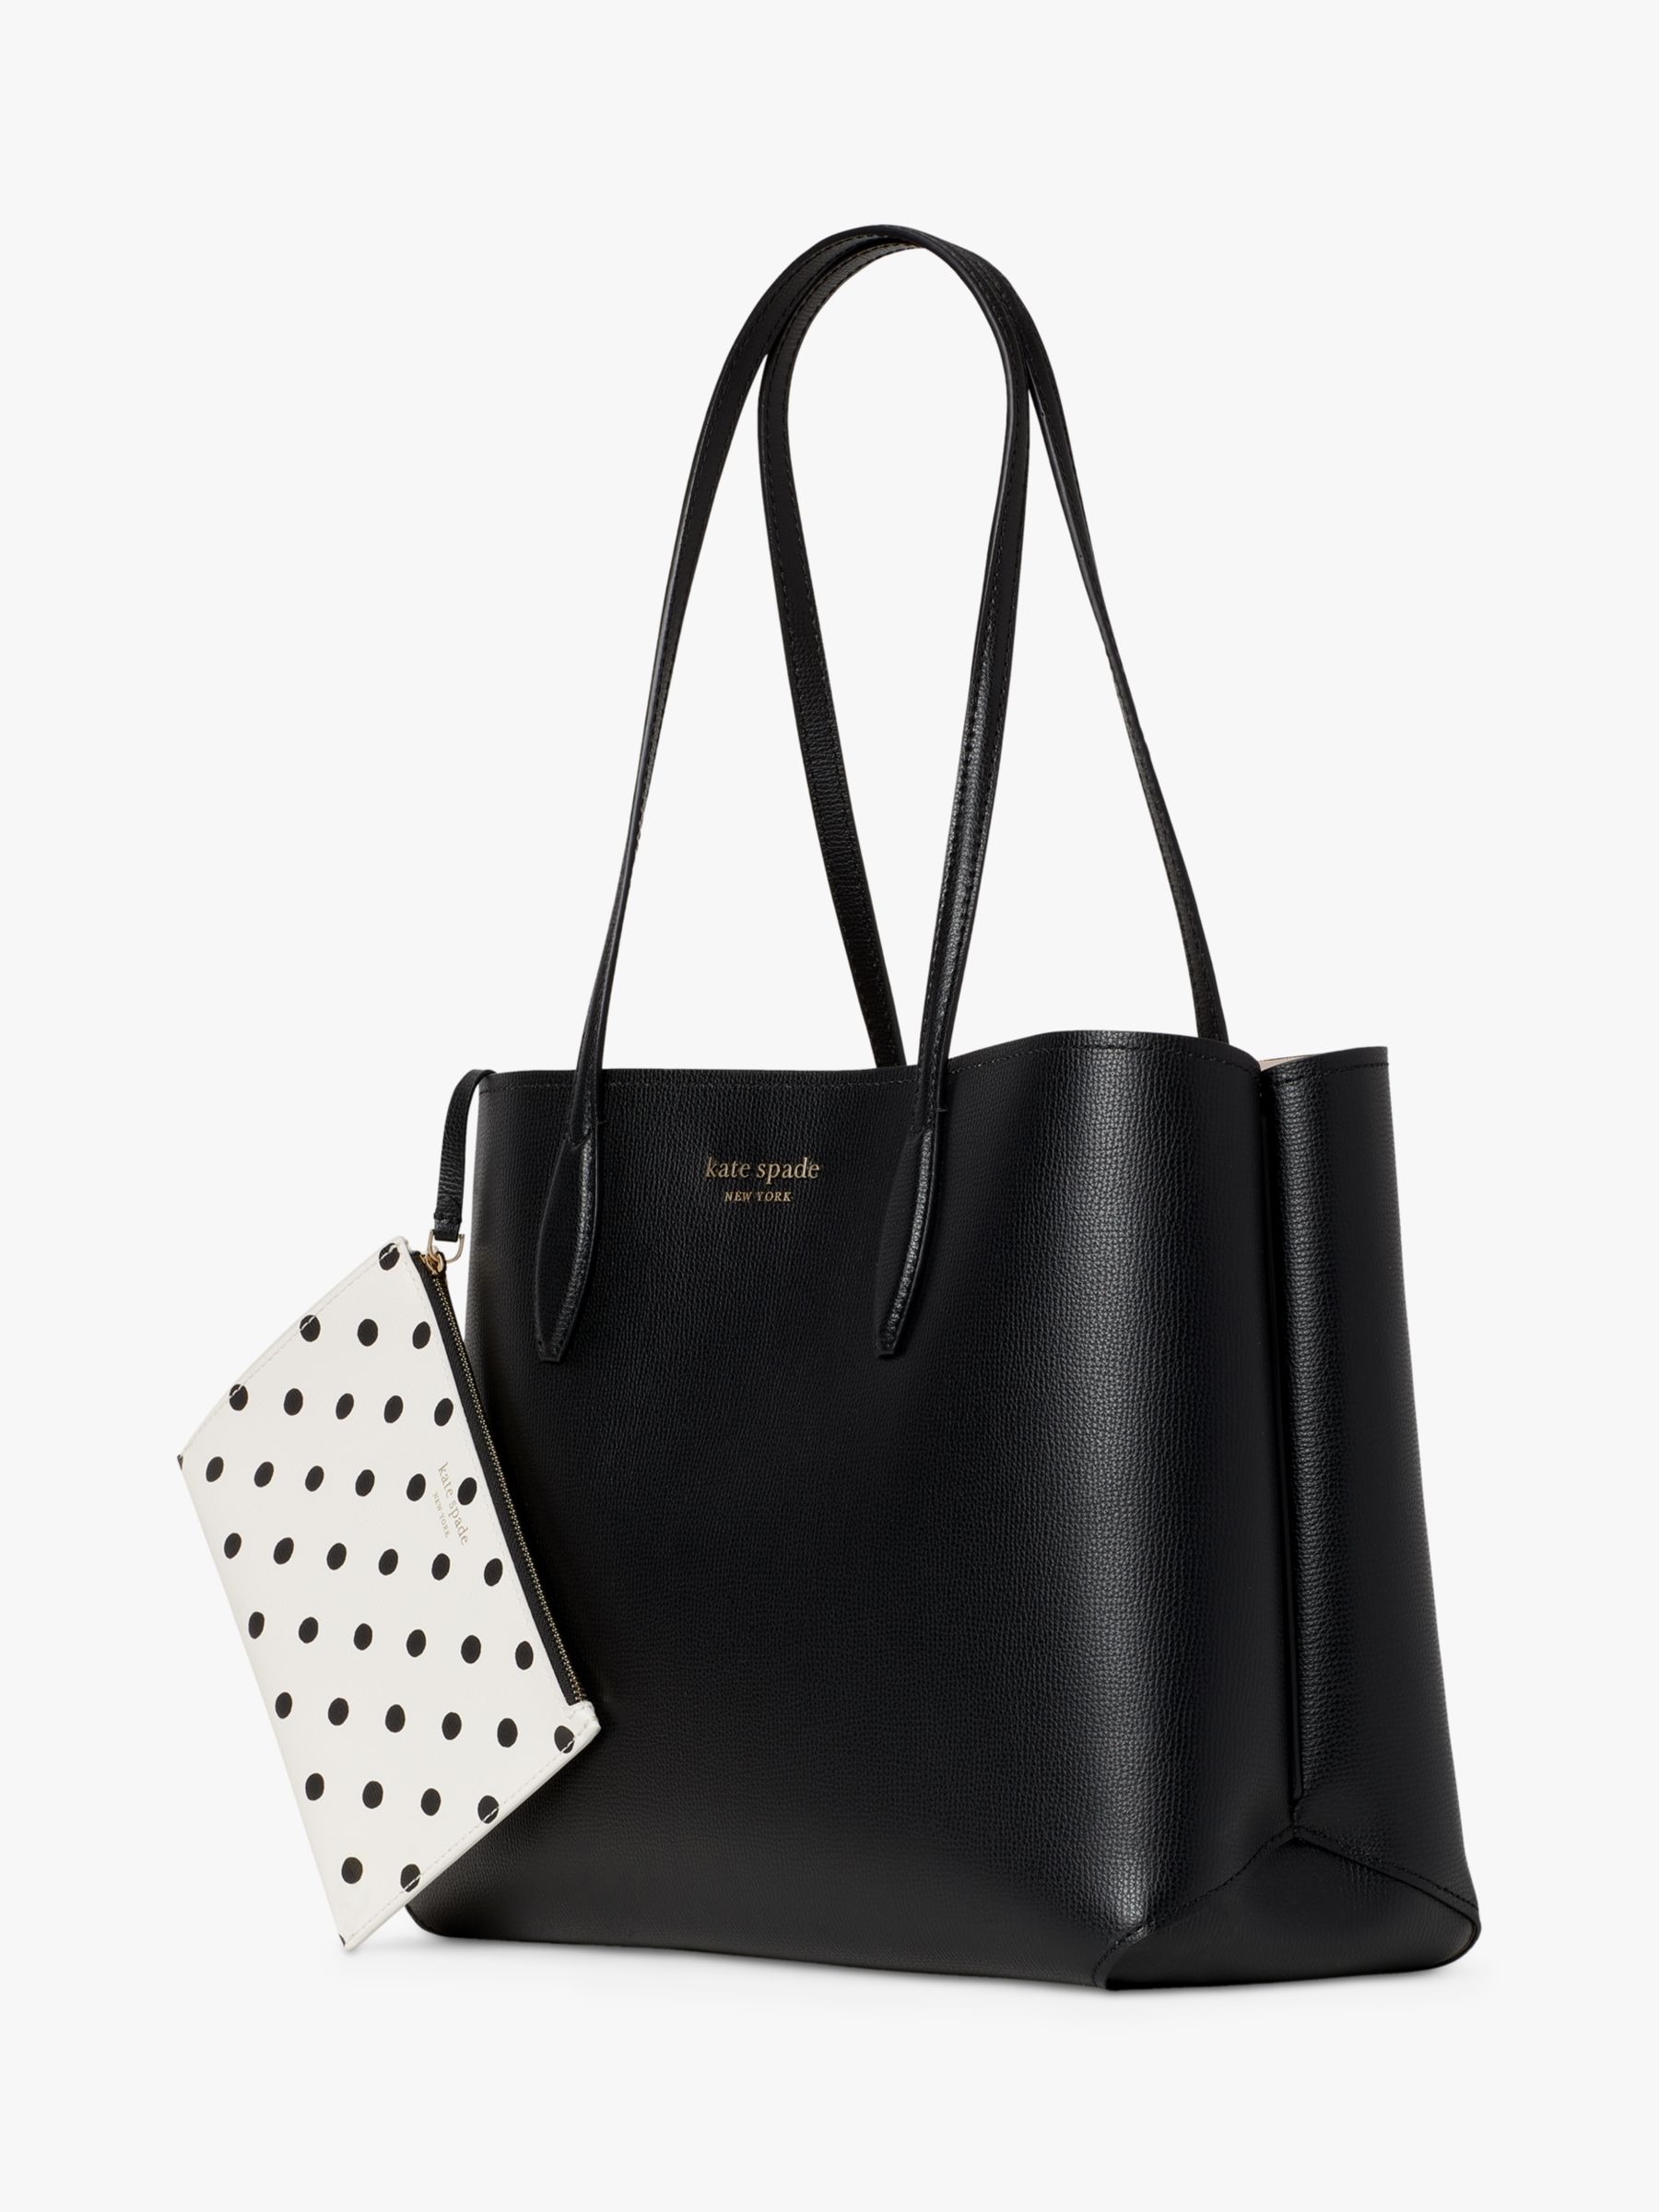 kate spade new york All Day Leather Large Tote Bag, Black at John Lewis &  Partners